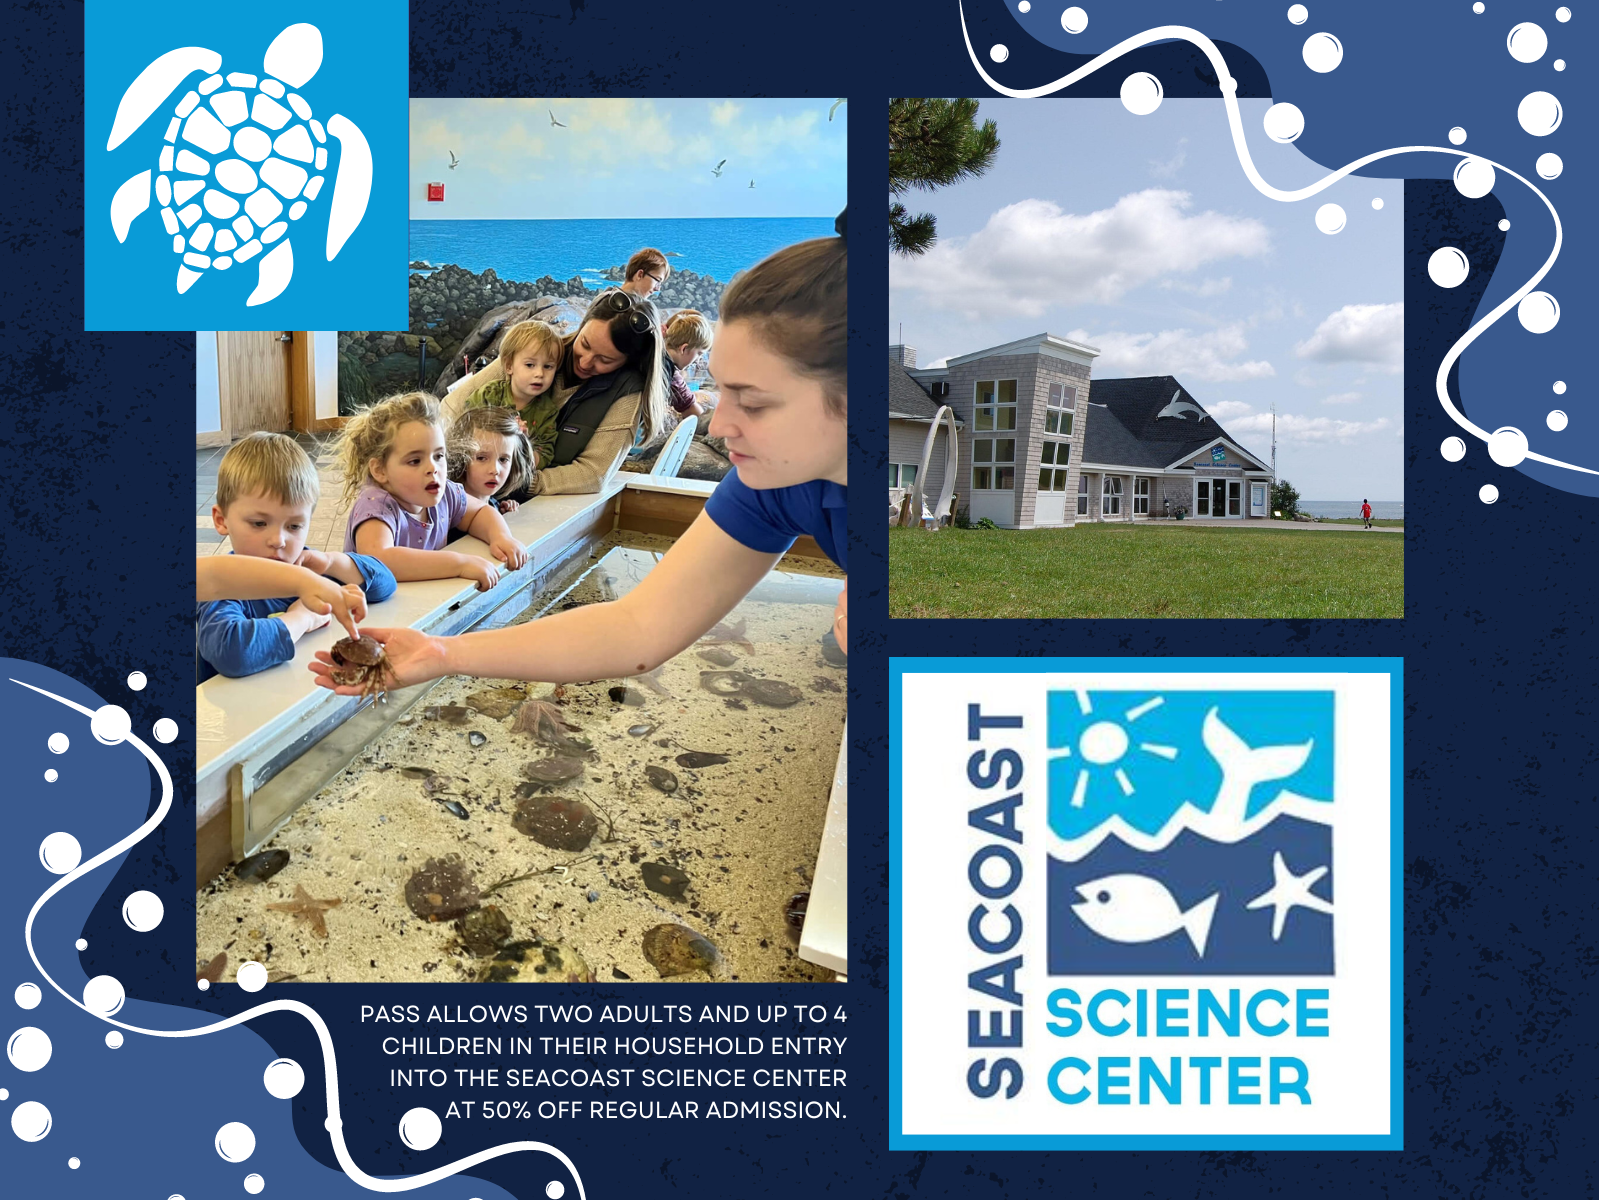 Seacoast Science Center Passes from the Bedford Public Library